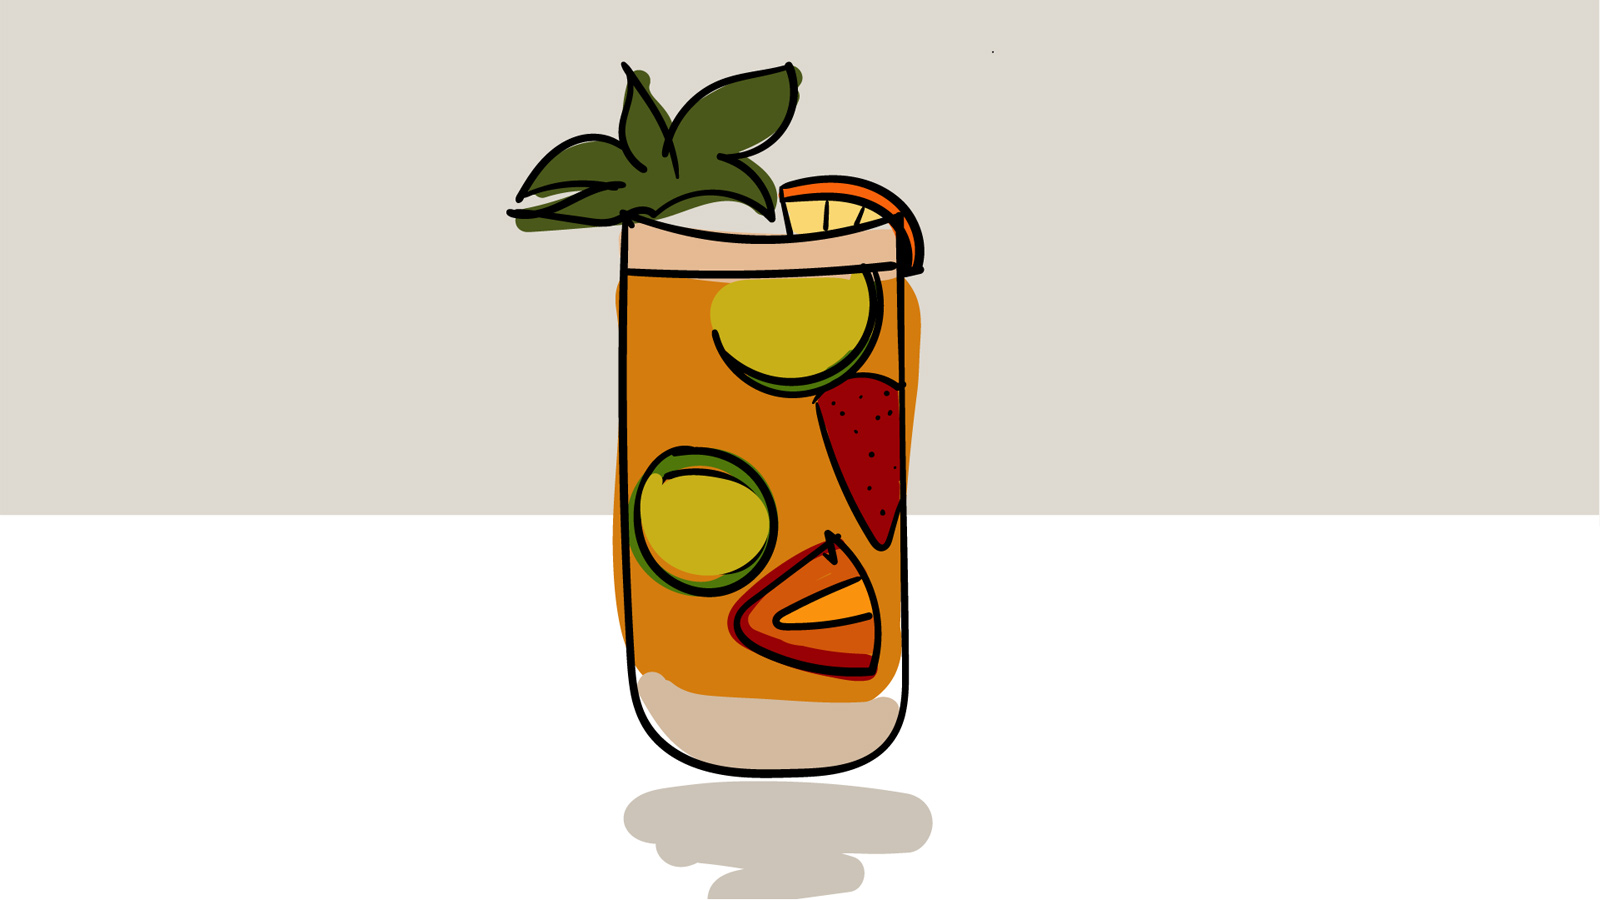 A Pimm’s No. 1 Cup cocktail representing the UK in Eurovision Song Contest